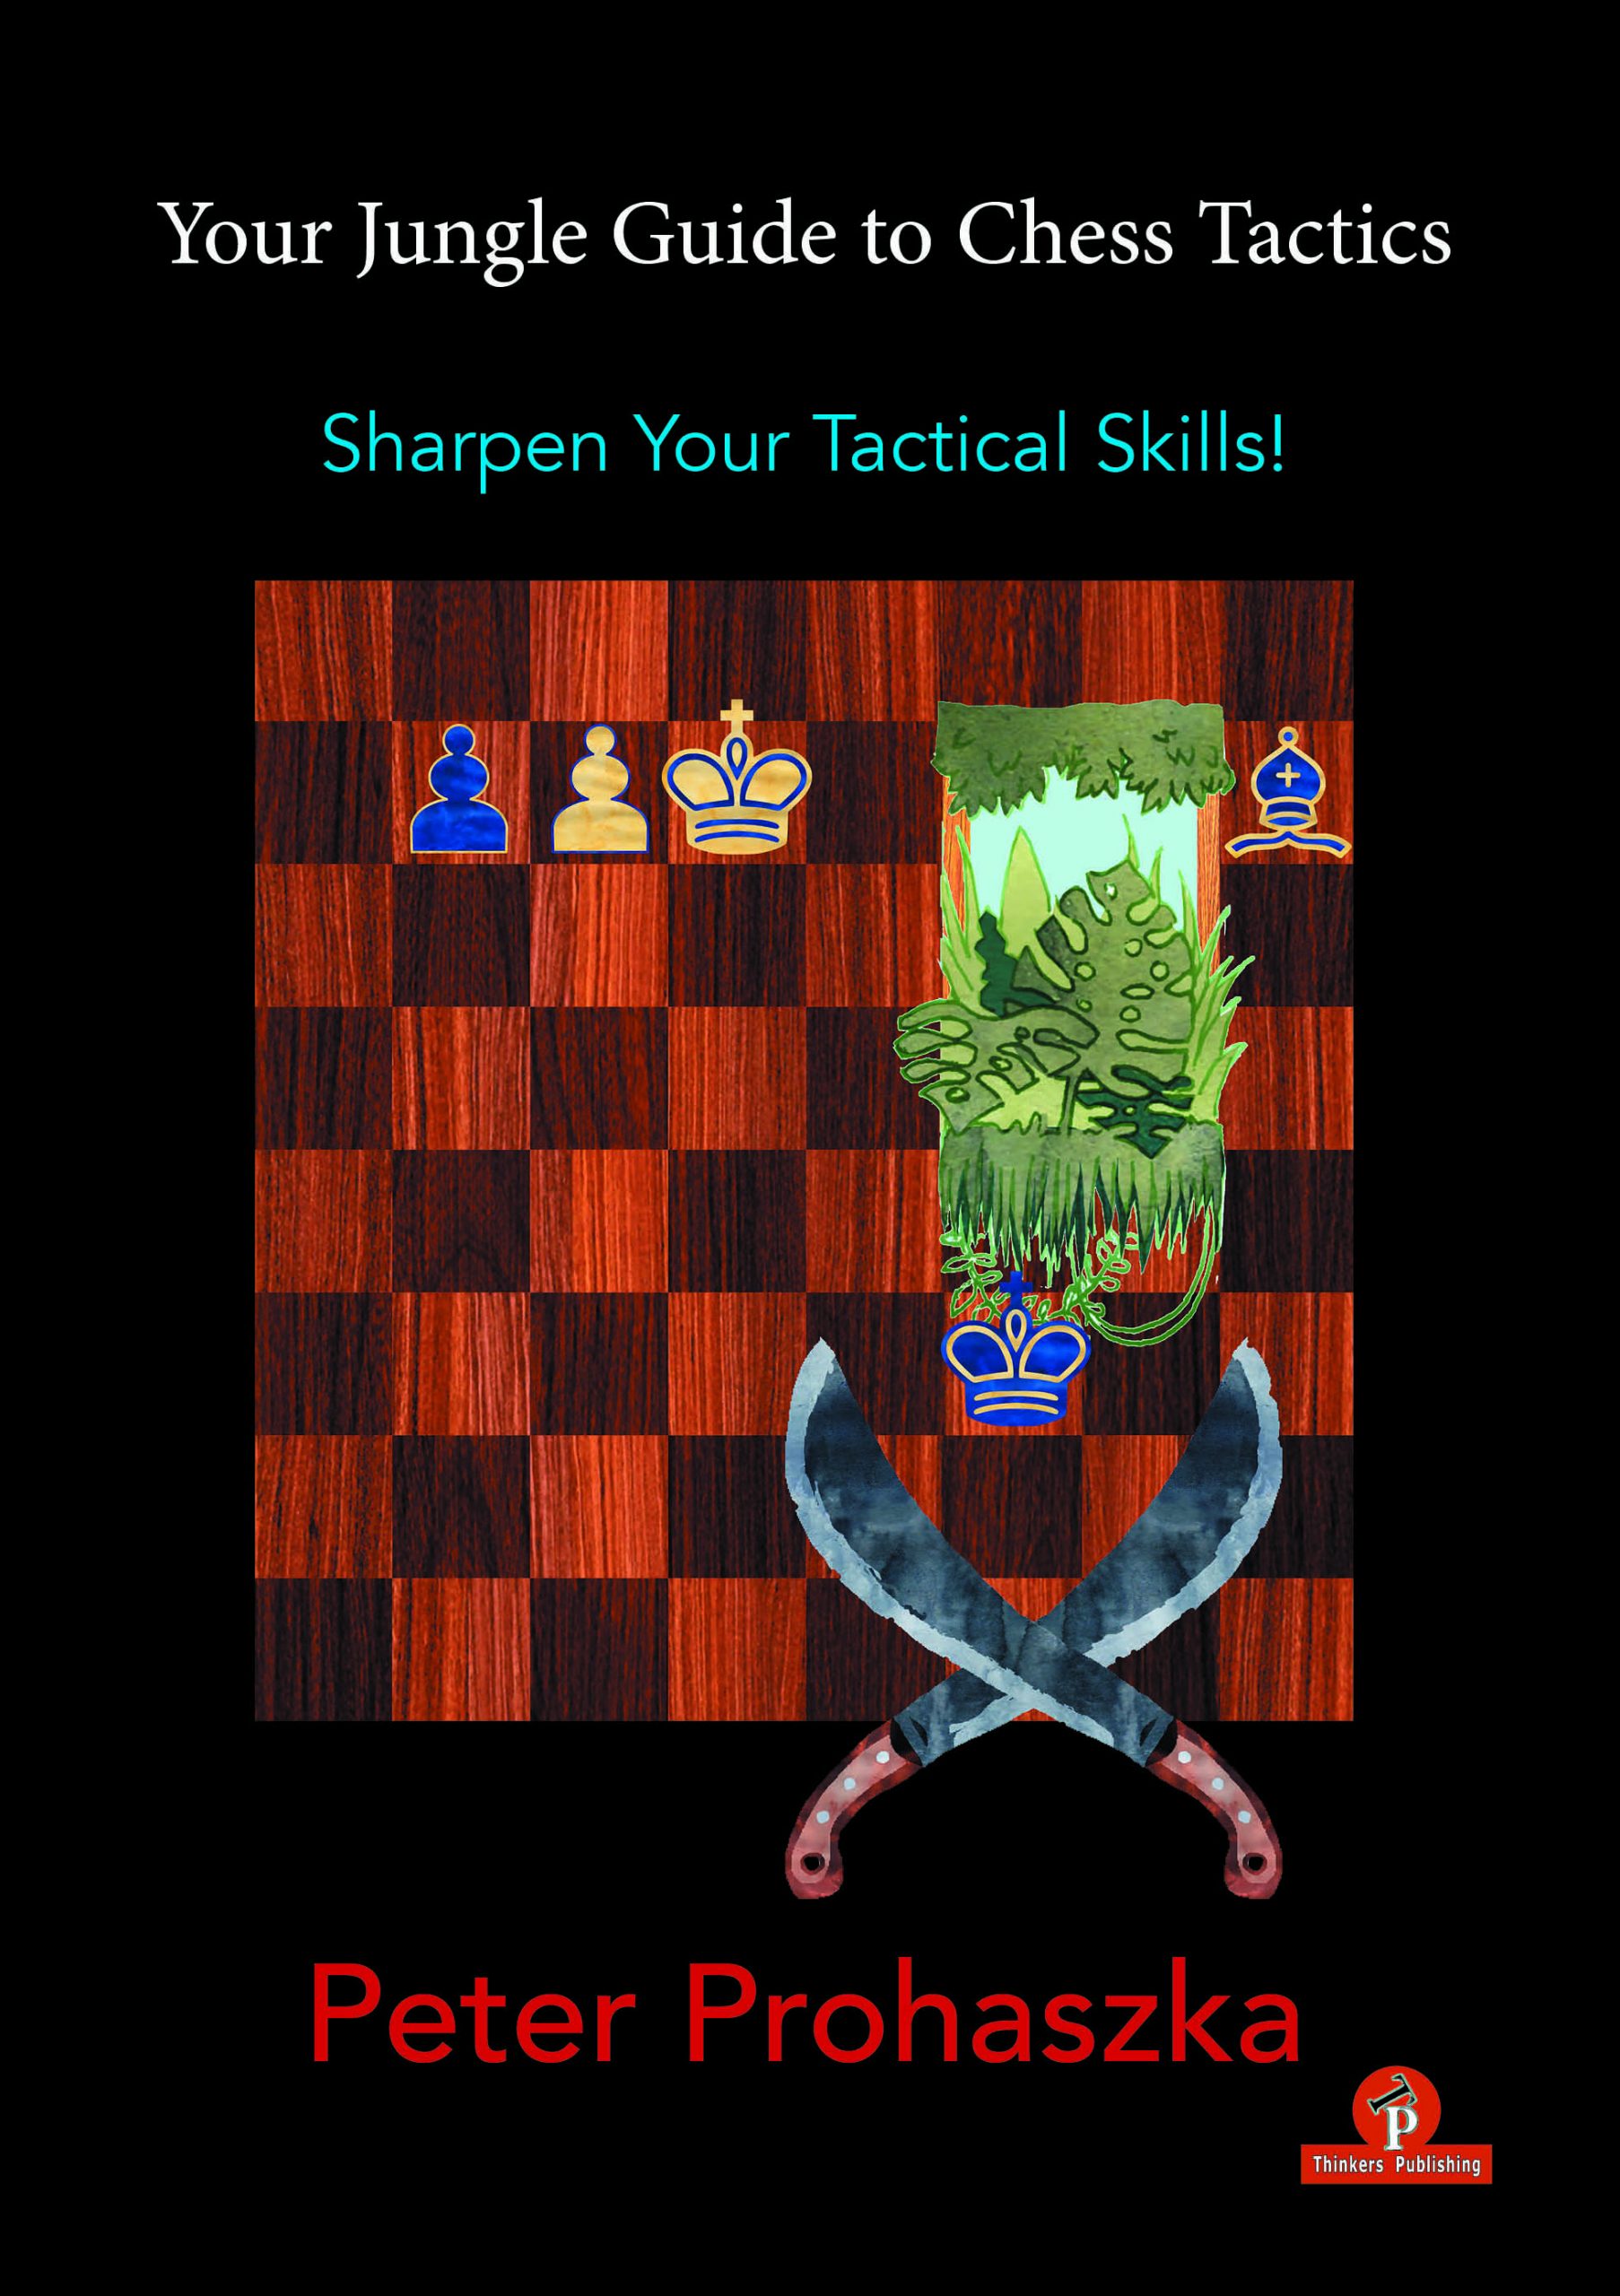 Your Jungle Guide to Chess Tactics – Sharpen your Tactical Skills!